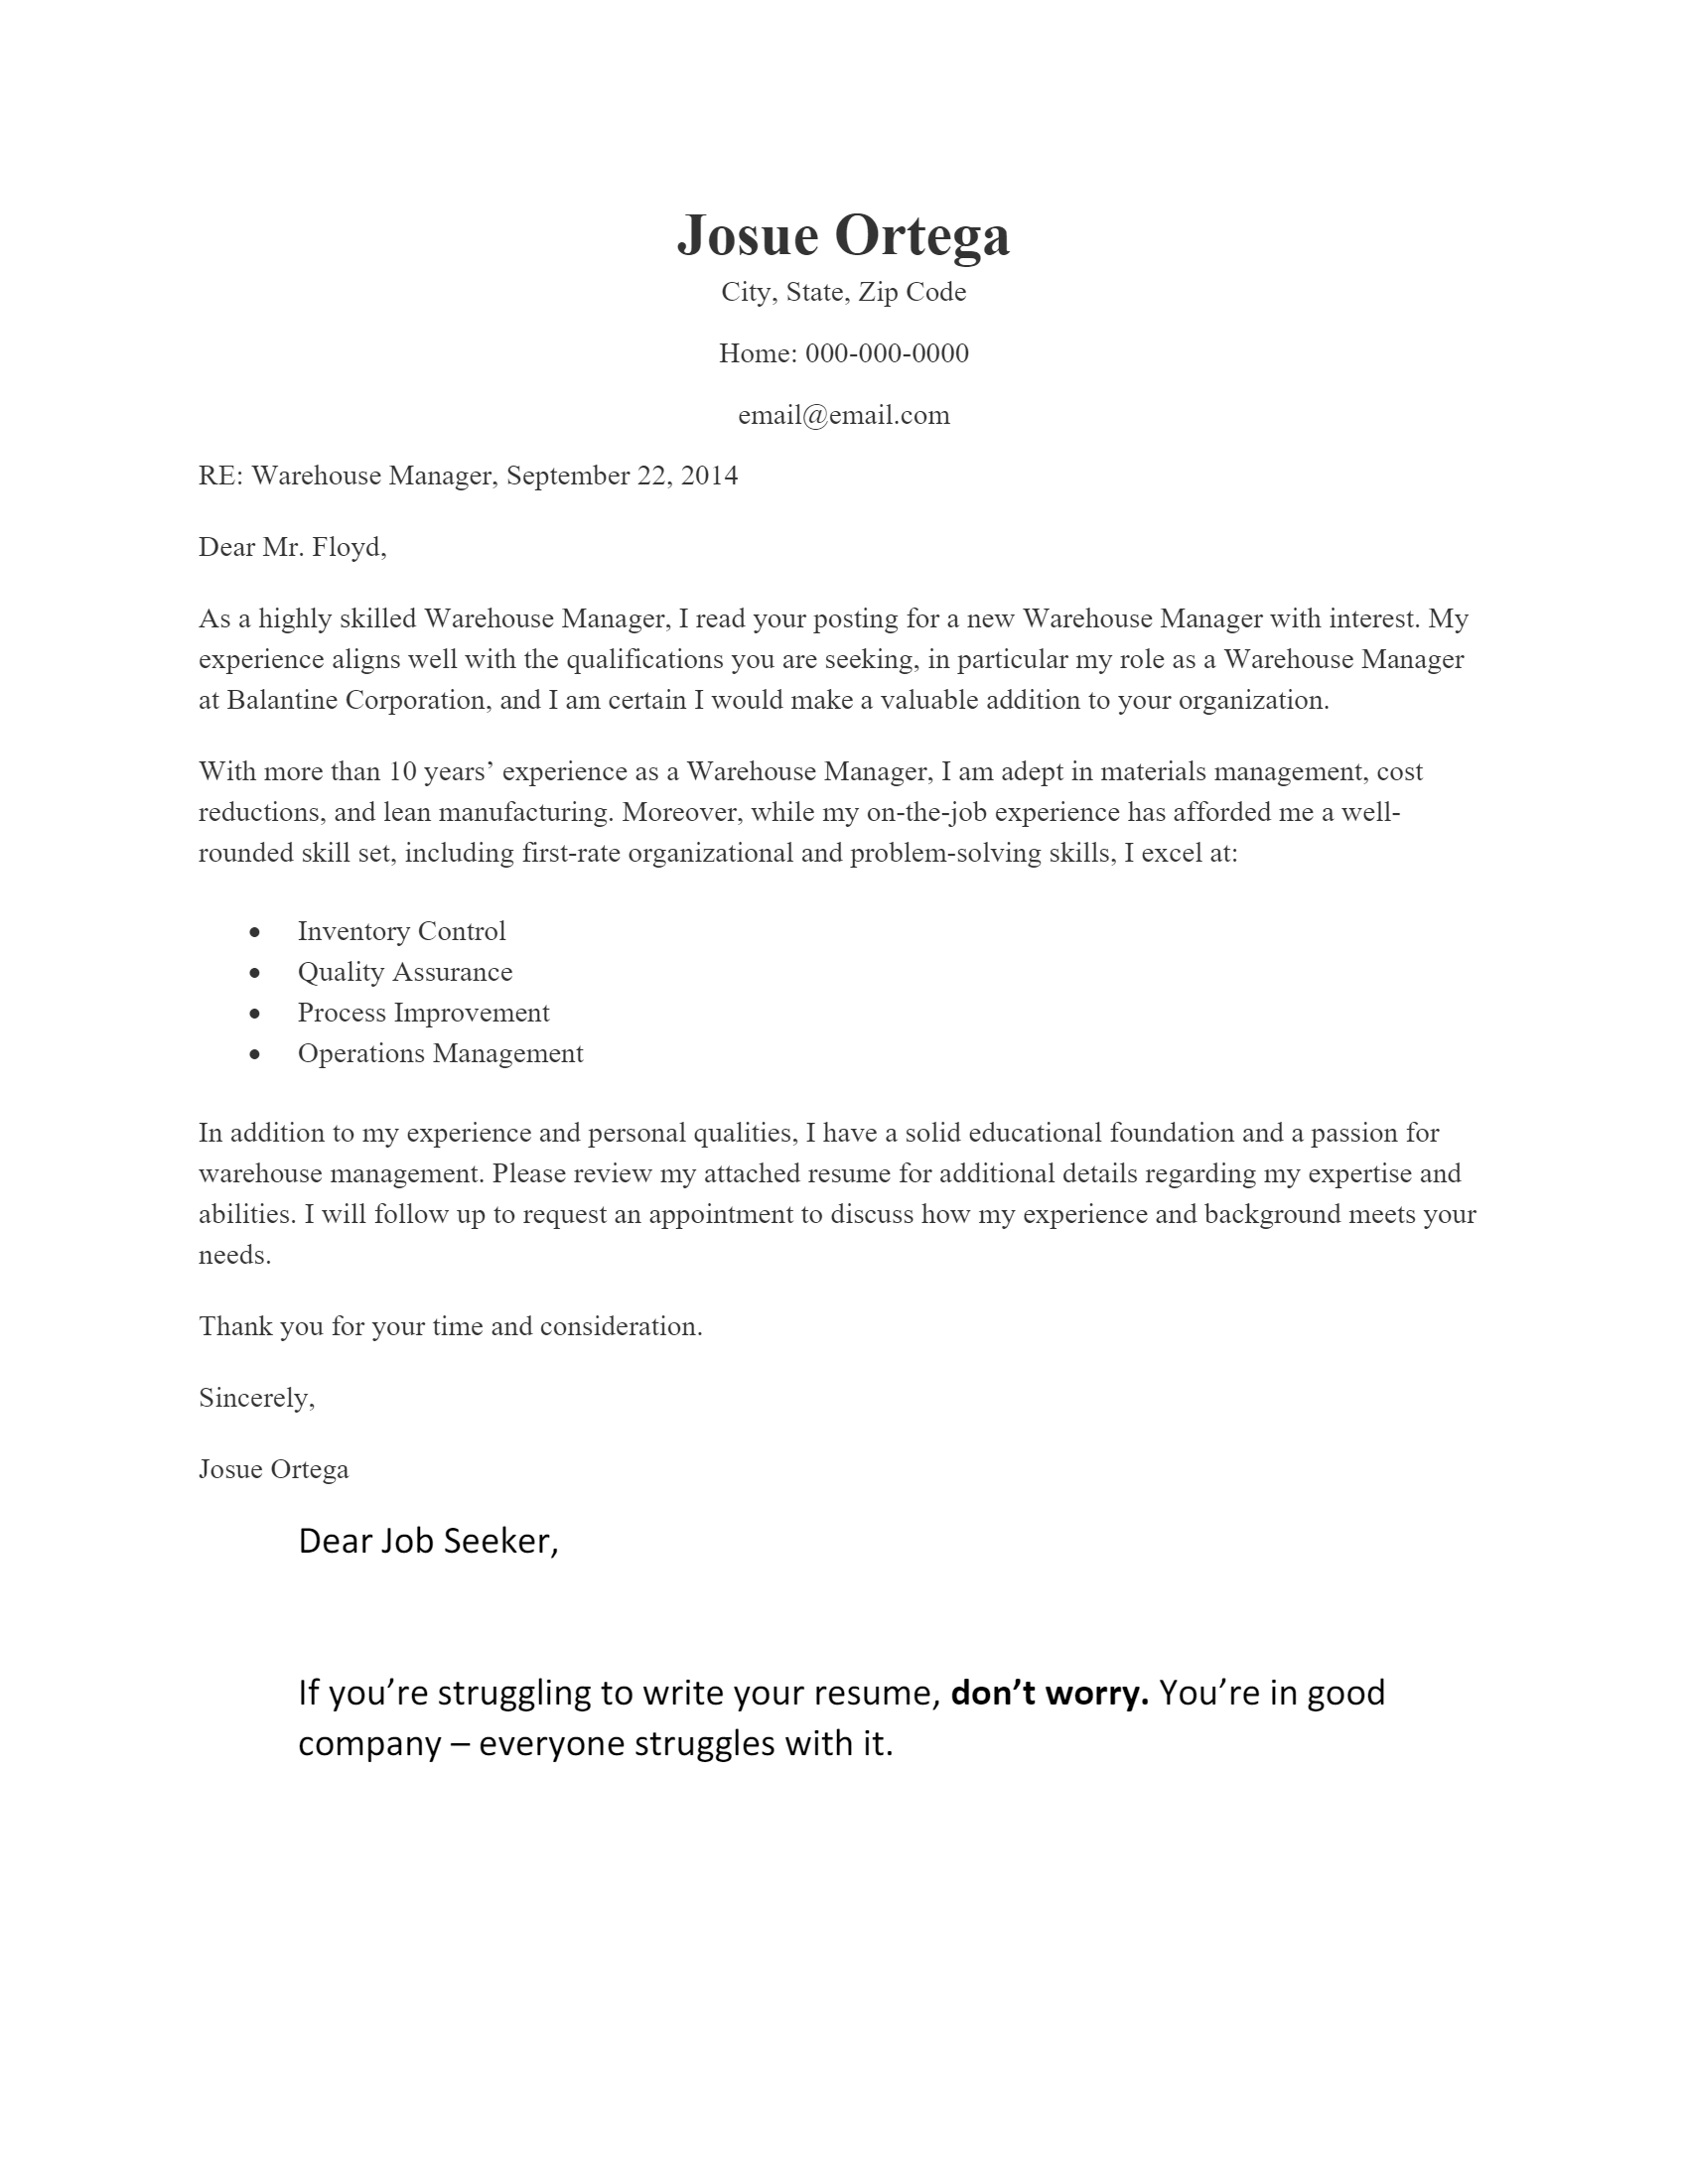 cover letter for warehouse job with experience